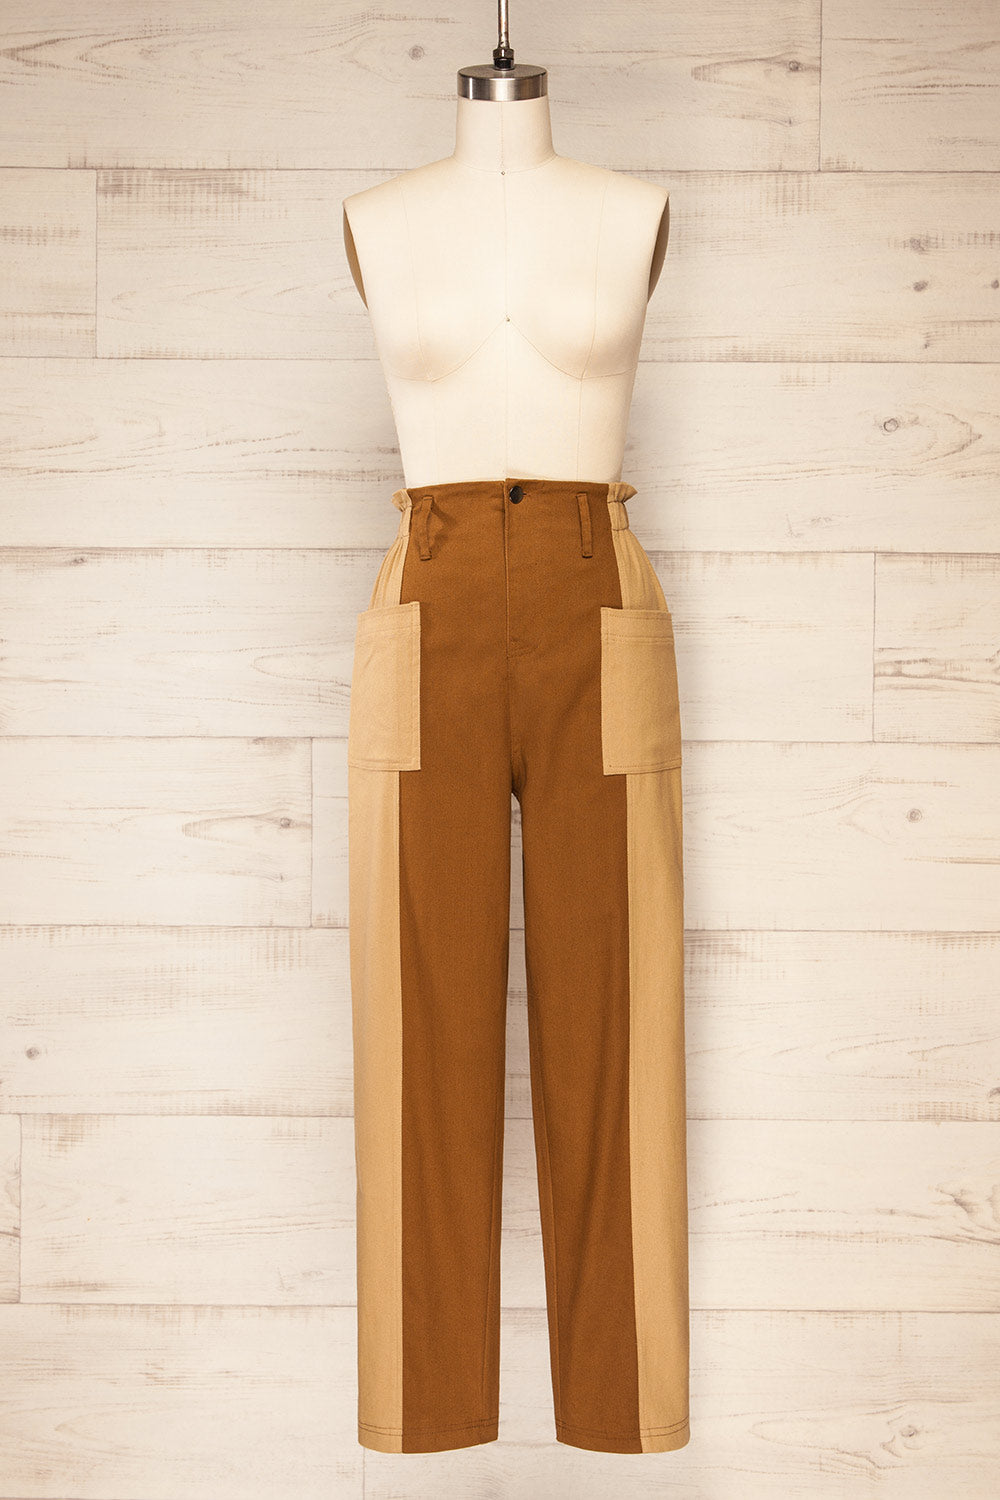 Petite High-Rise Tapered Pant